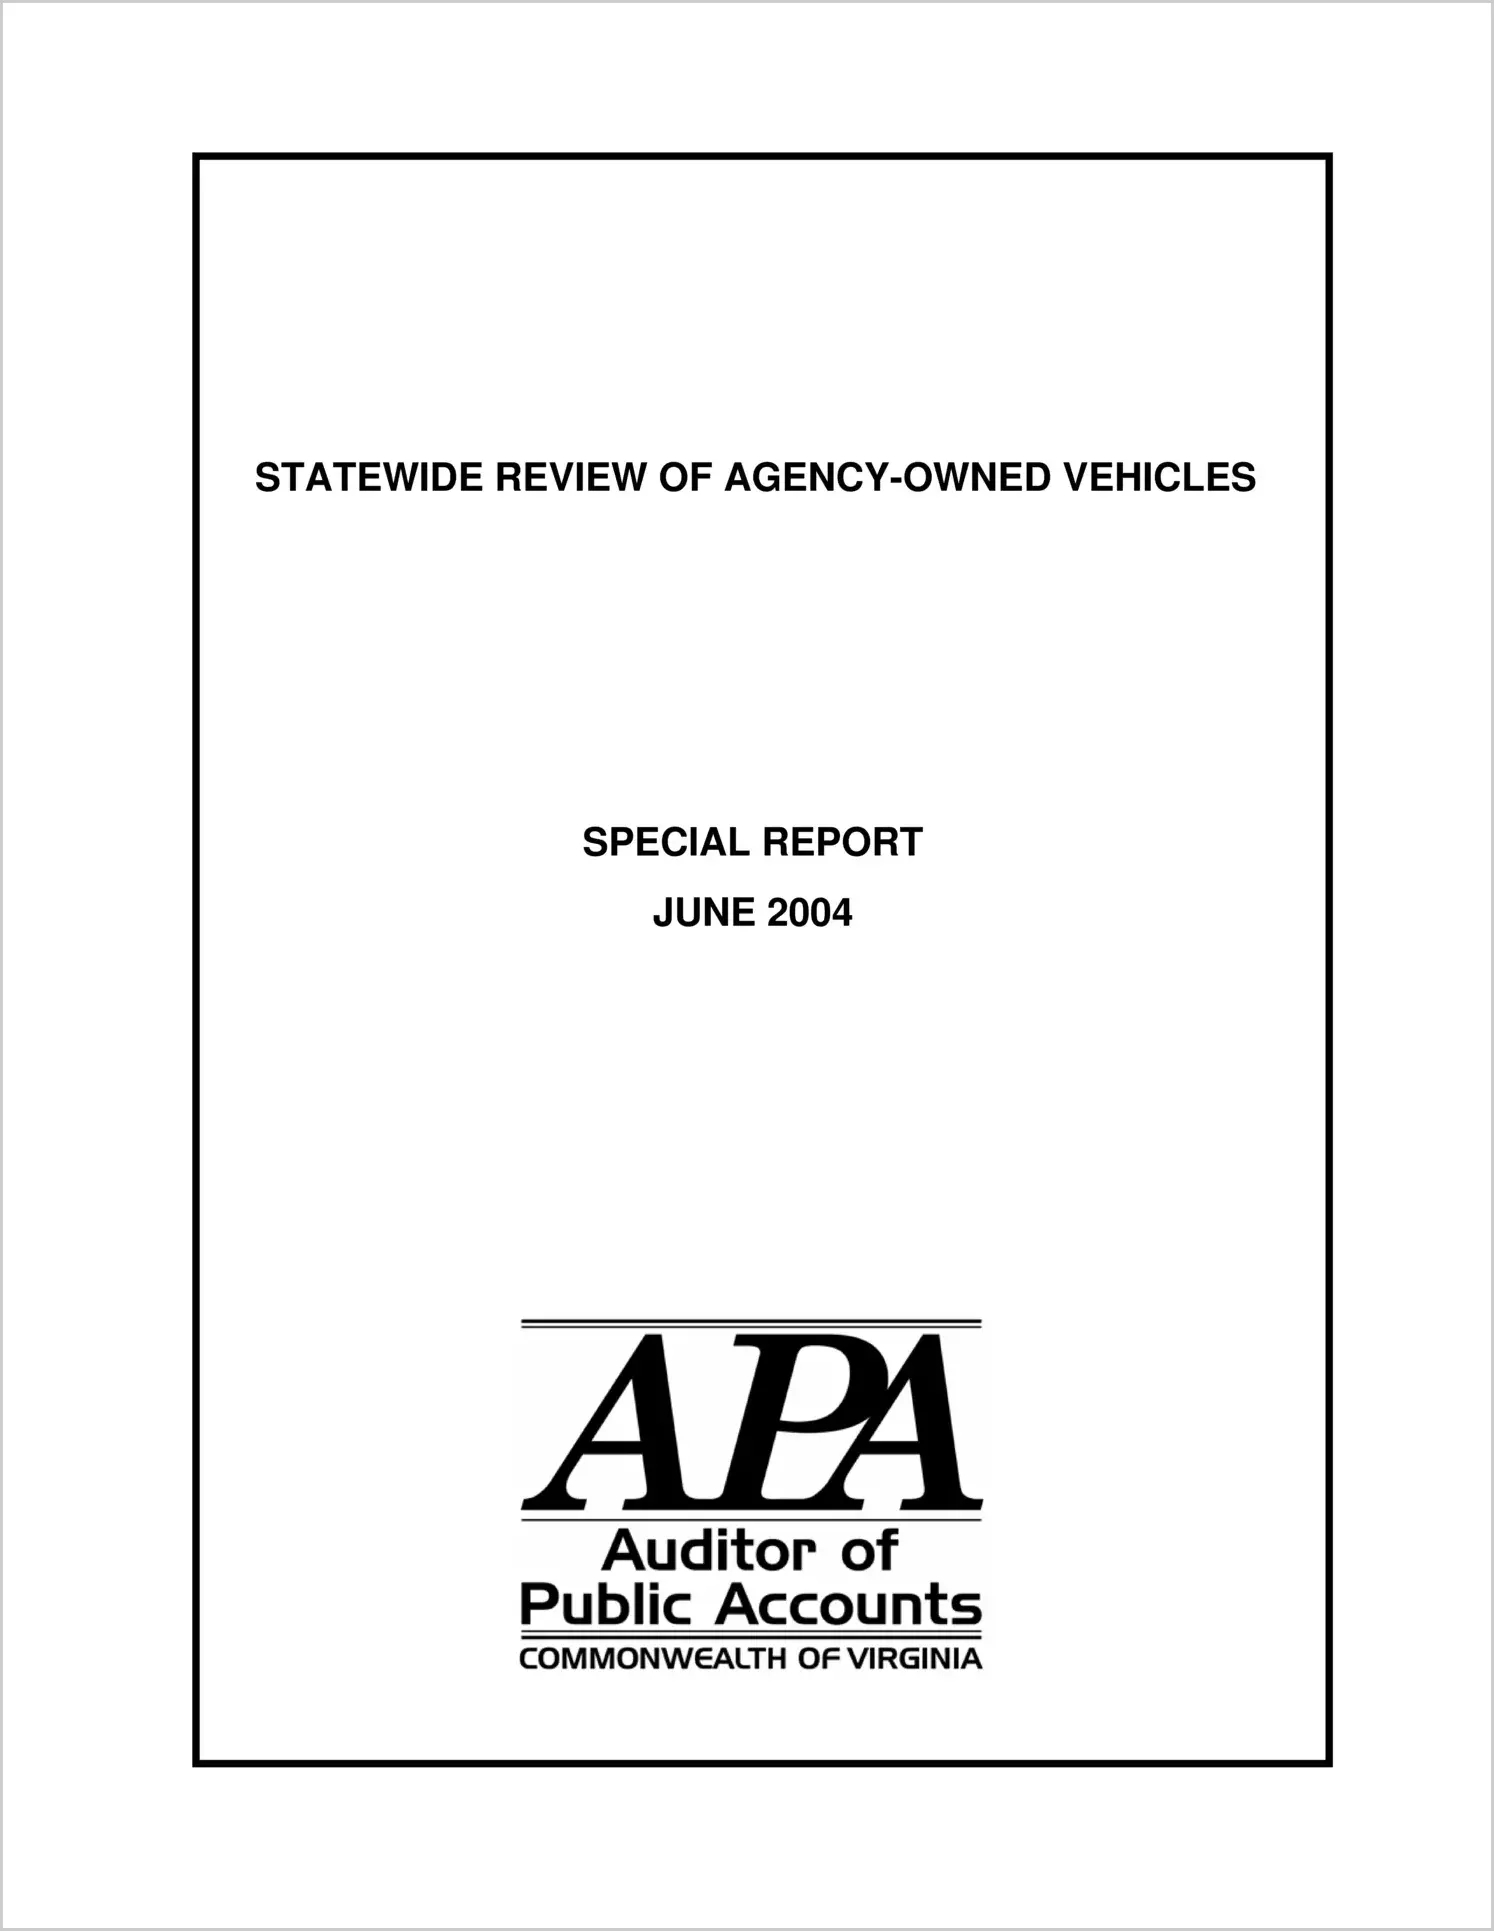 Special ReportStatewide Review of Agency Owned Vehicles(Report Date: June 2004)